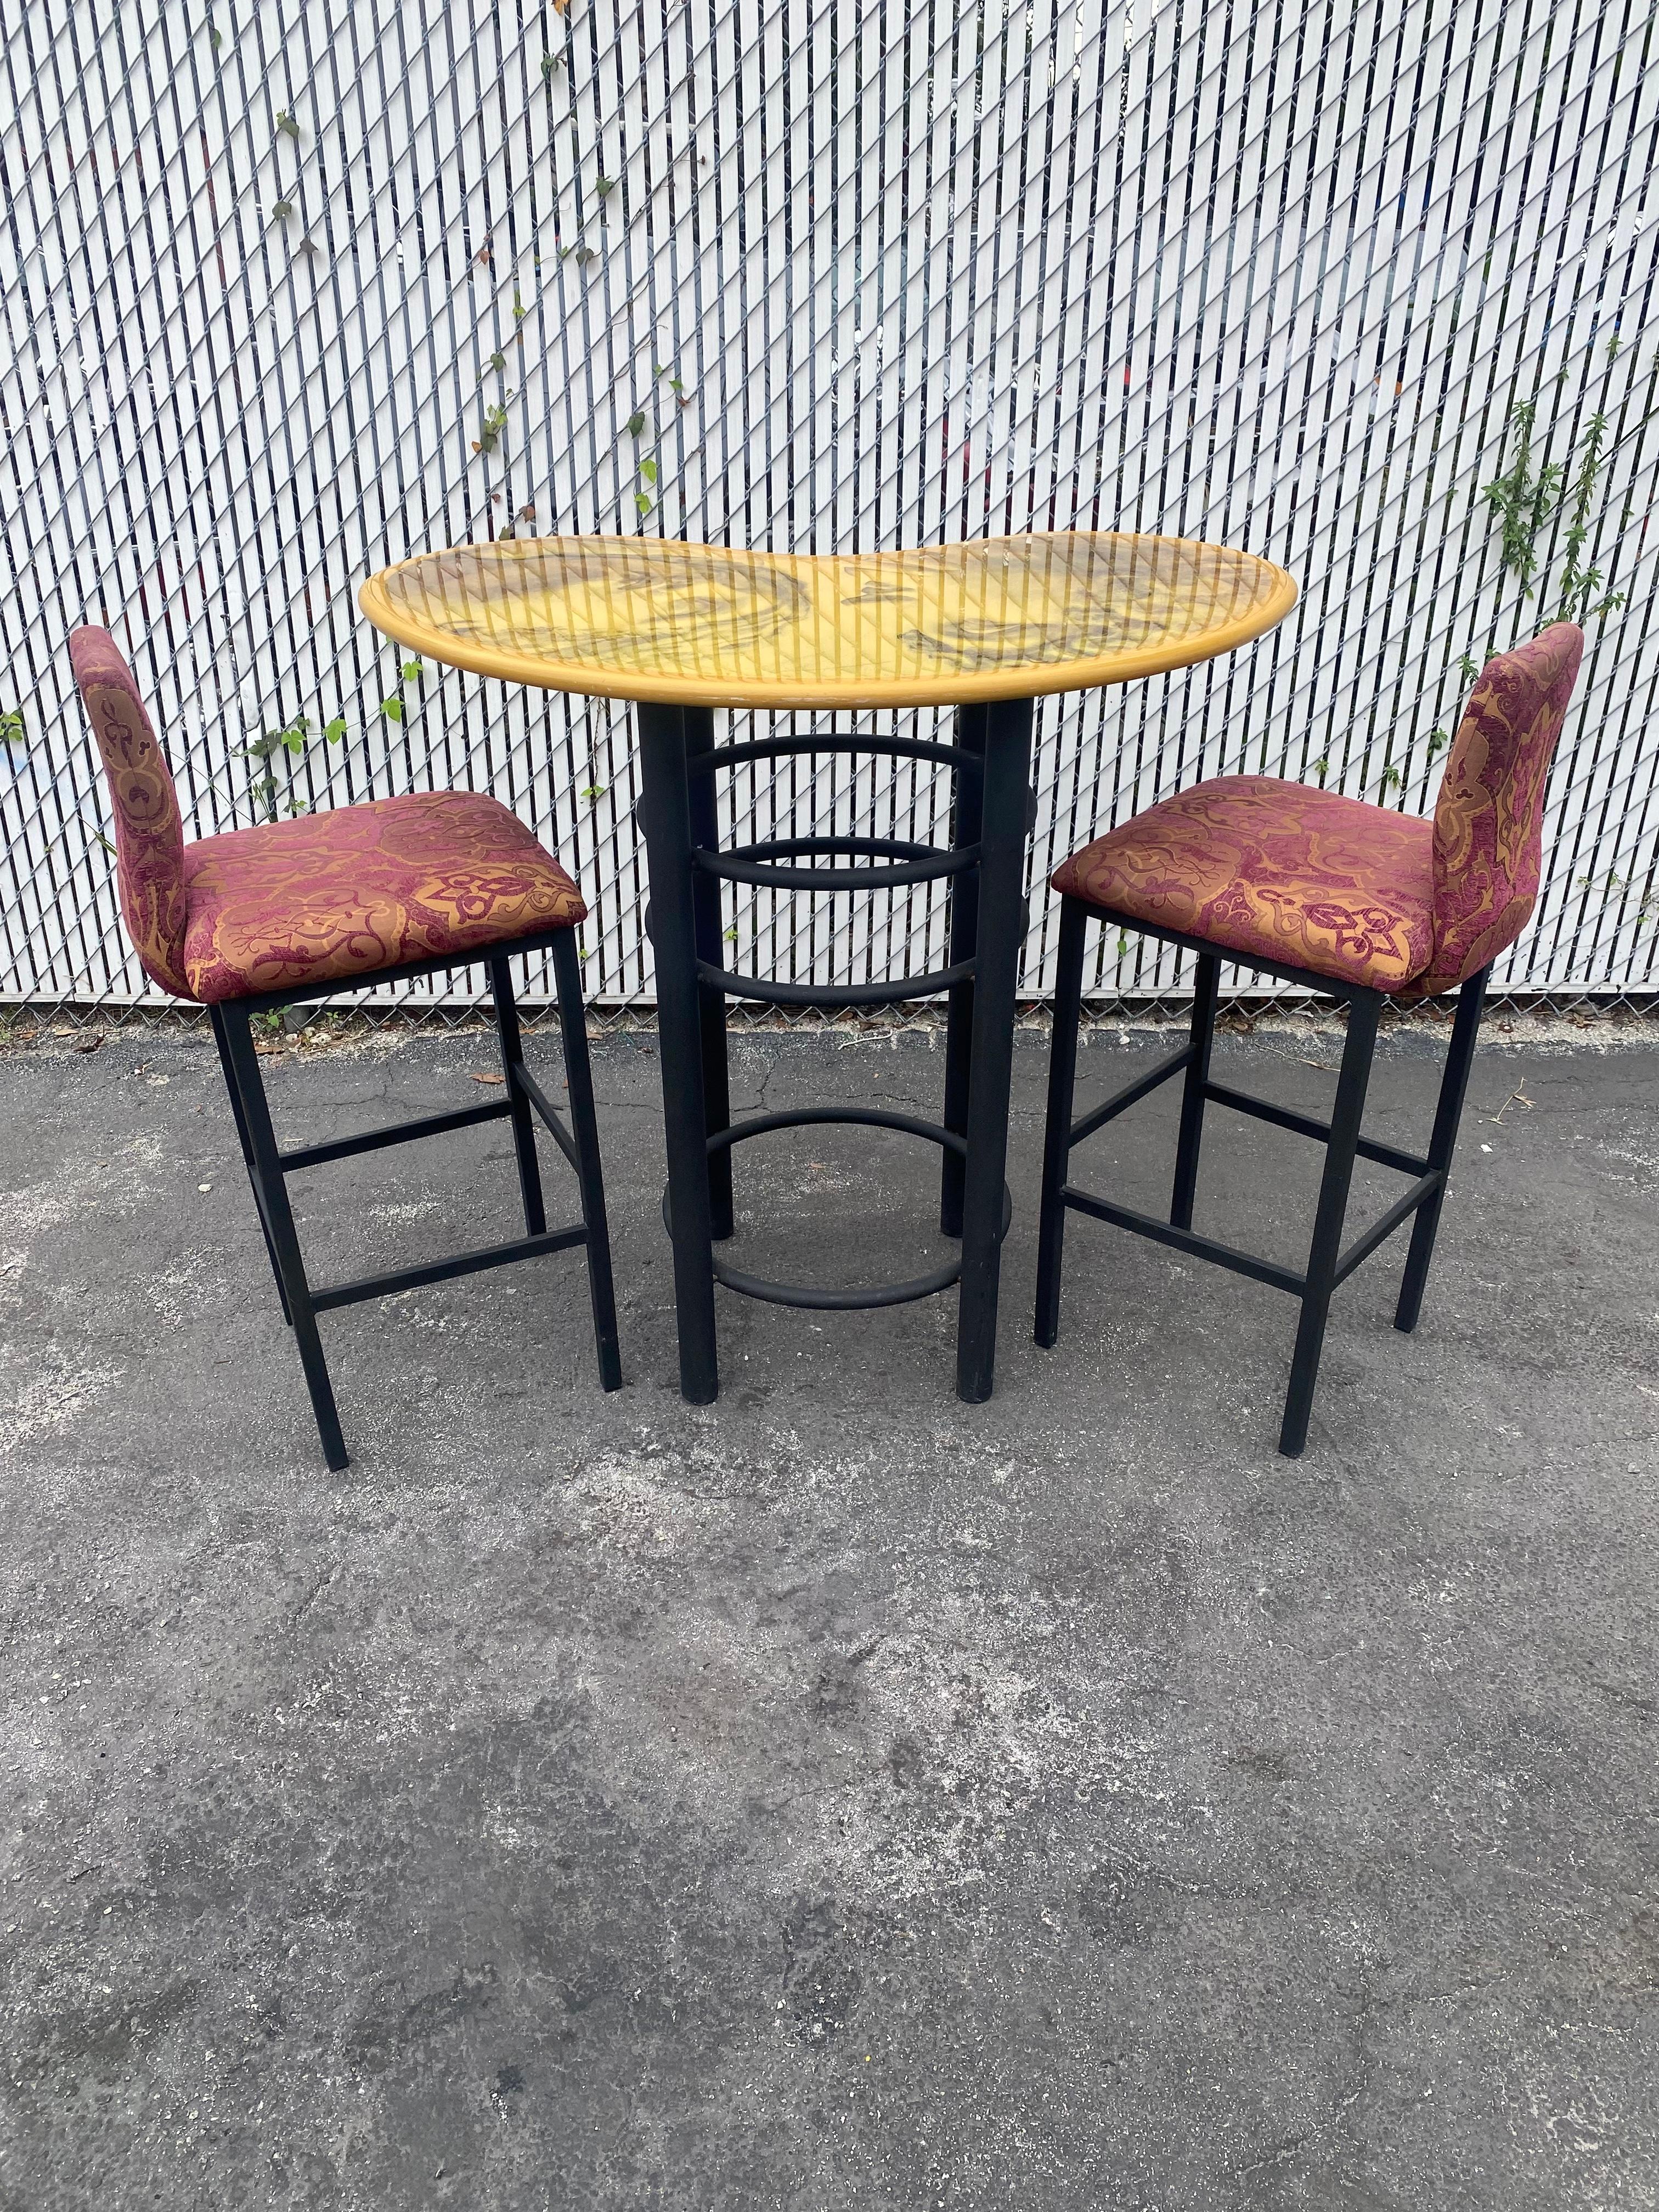 1980s Artistic Kidney Bar Pub Dining Table and Chairs, Set of 3 For Sale 2